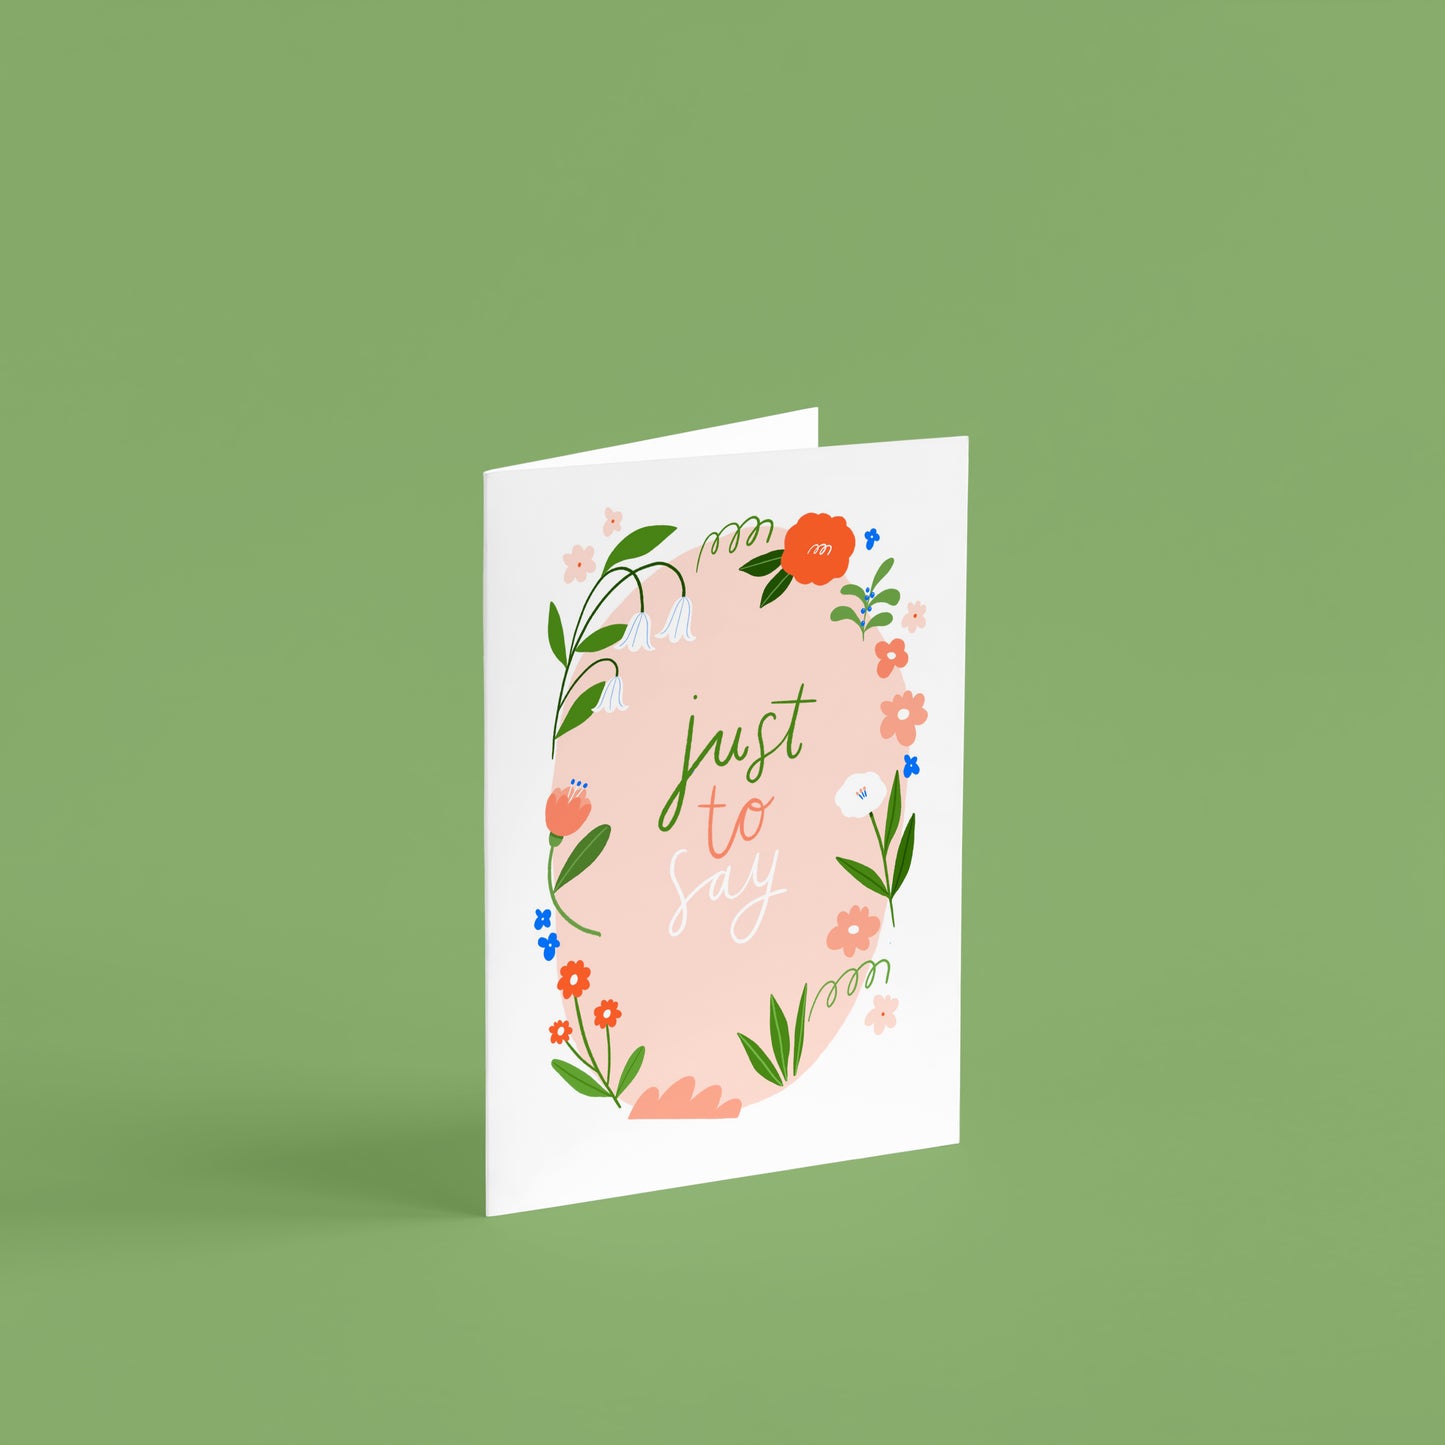 A6 greetings card 'just to say' pink oval shape with a delicate floral border